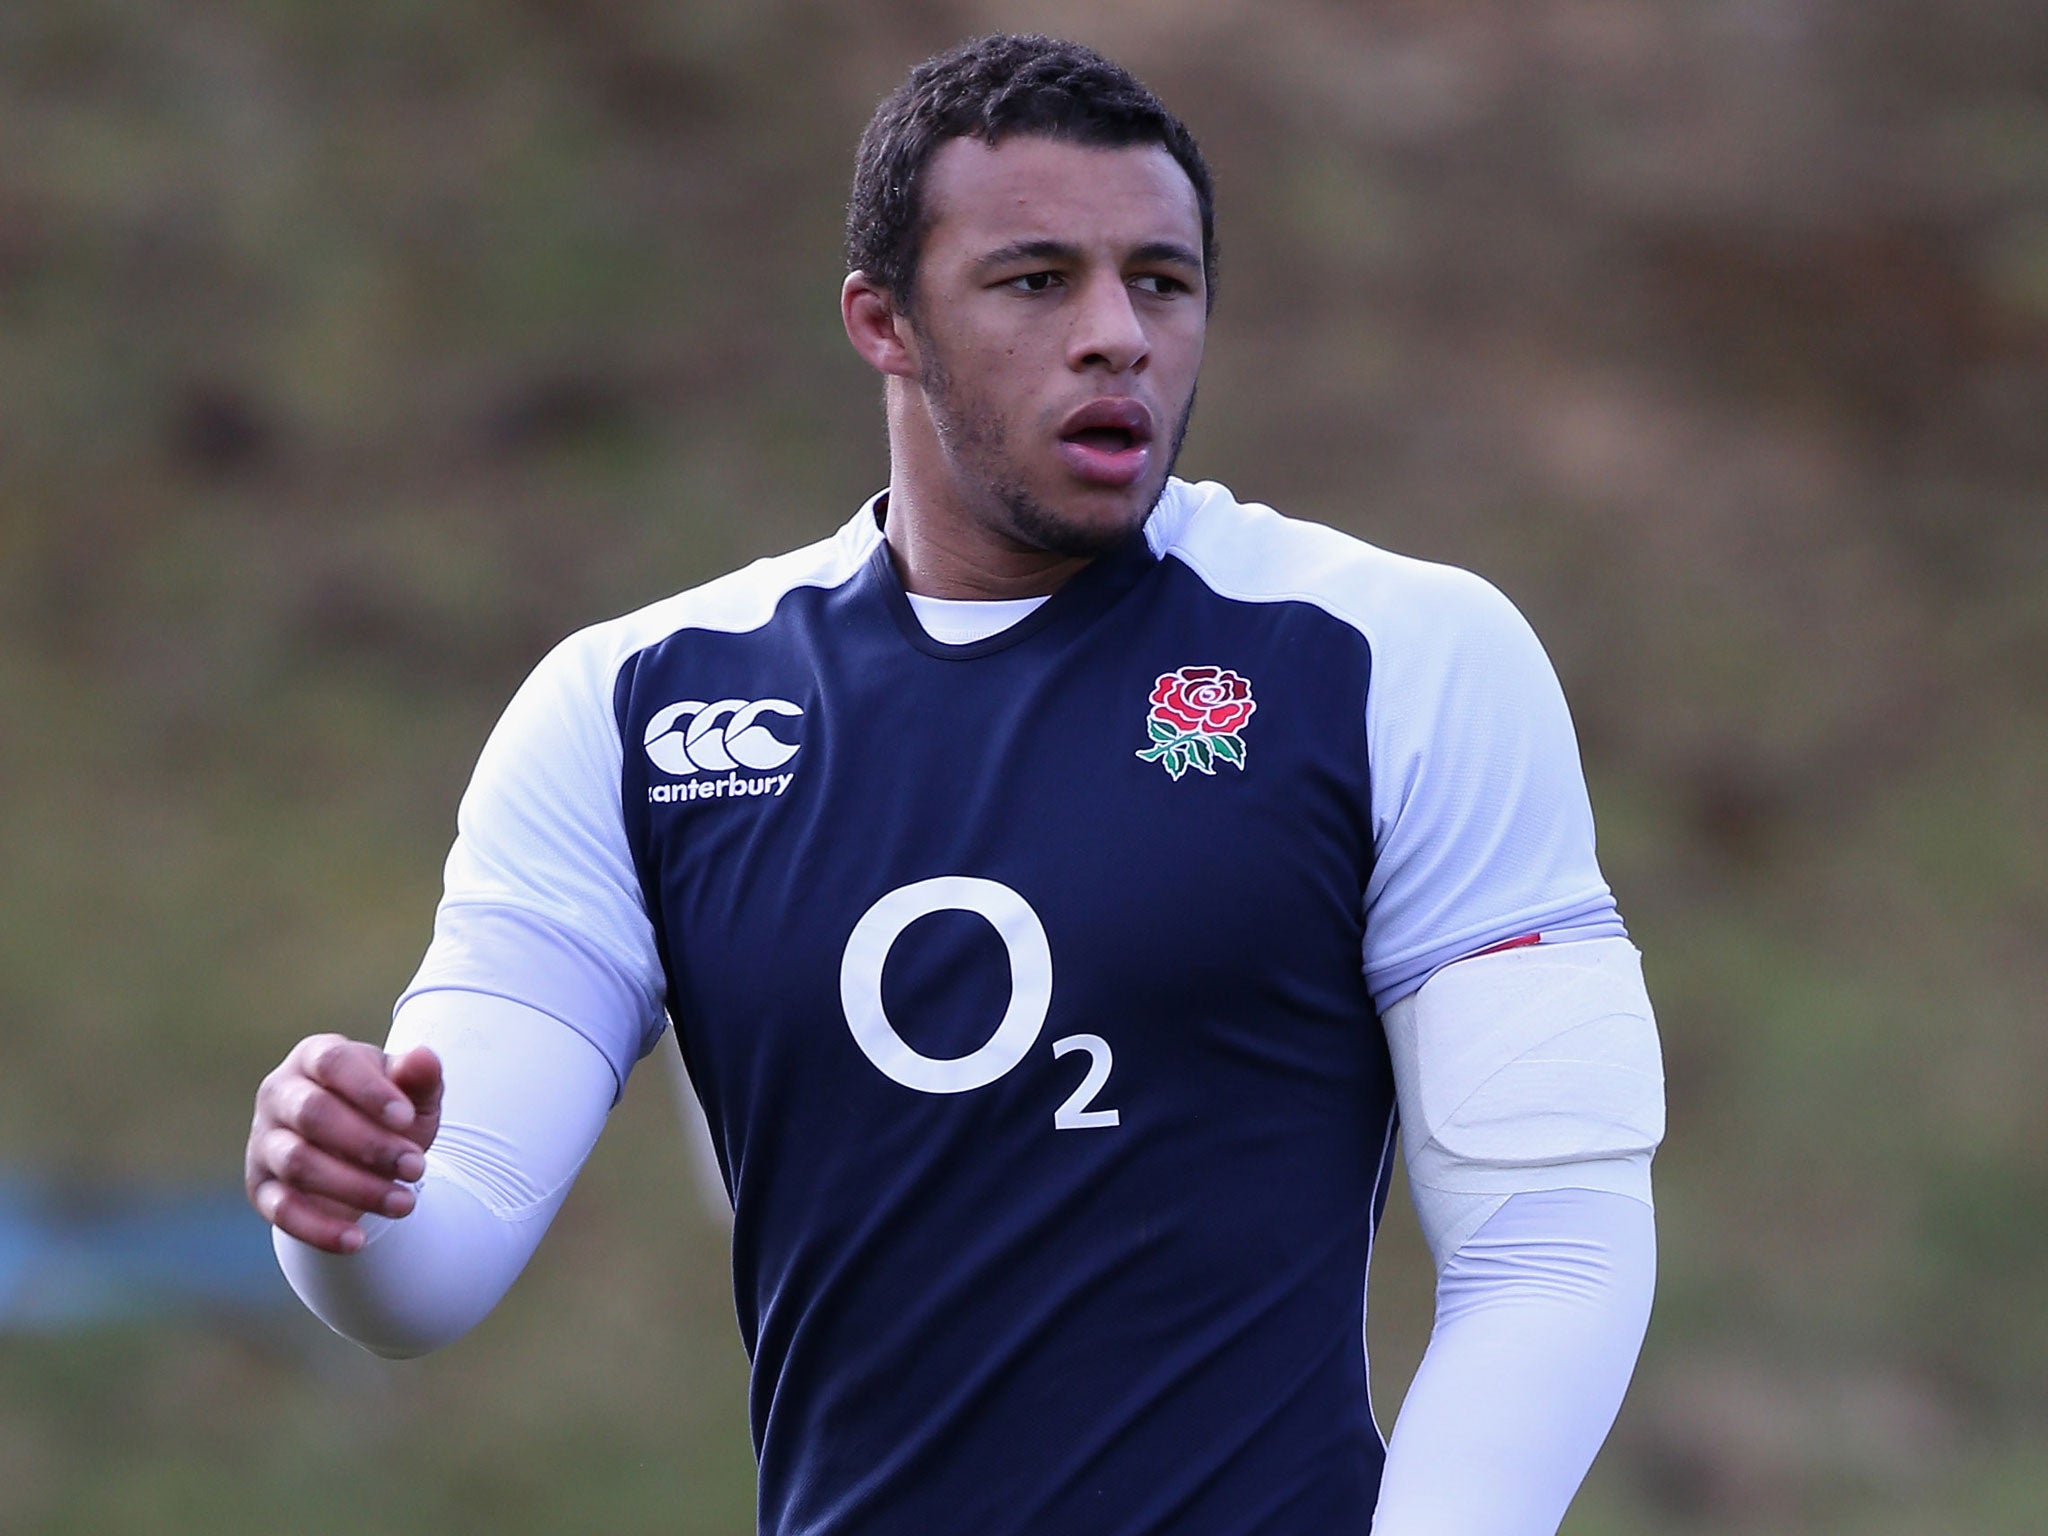 Hard graft: Courtney Lawes is not about to apologise for his principal talent – hitting opponents hard – but he is working on line-out skills as well